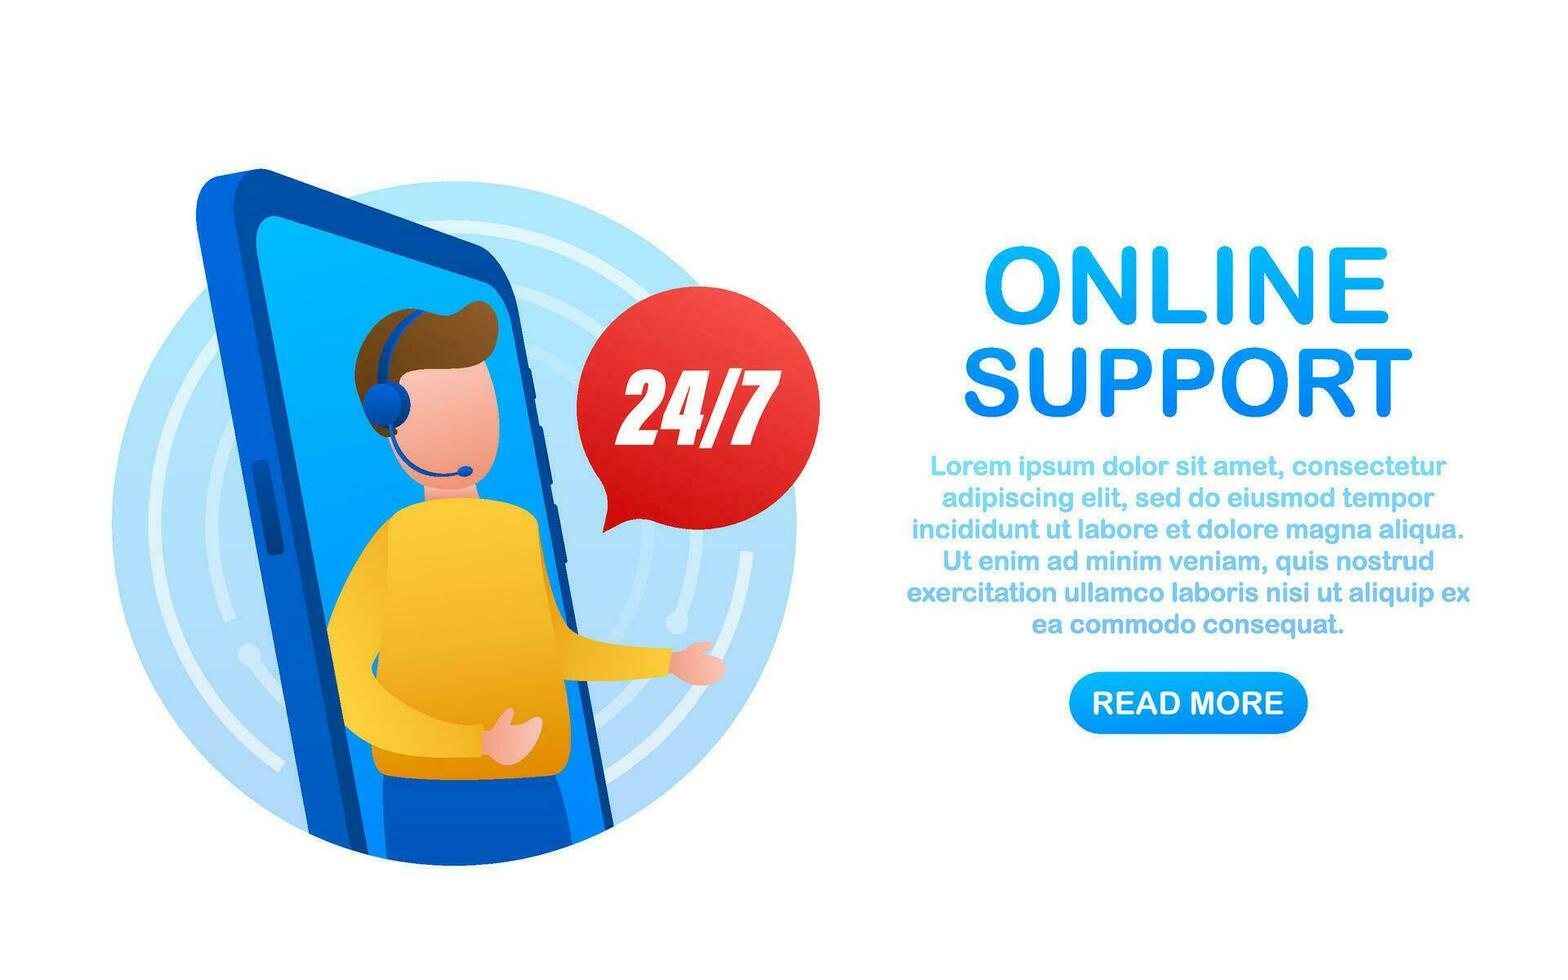 Customer service 24 7. Call center landing page. Online support center, assistance. Vector stock illustration